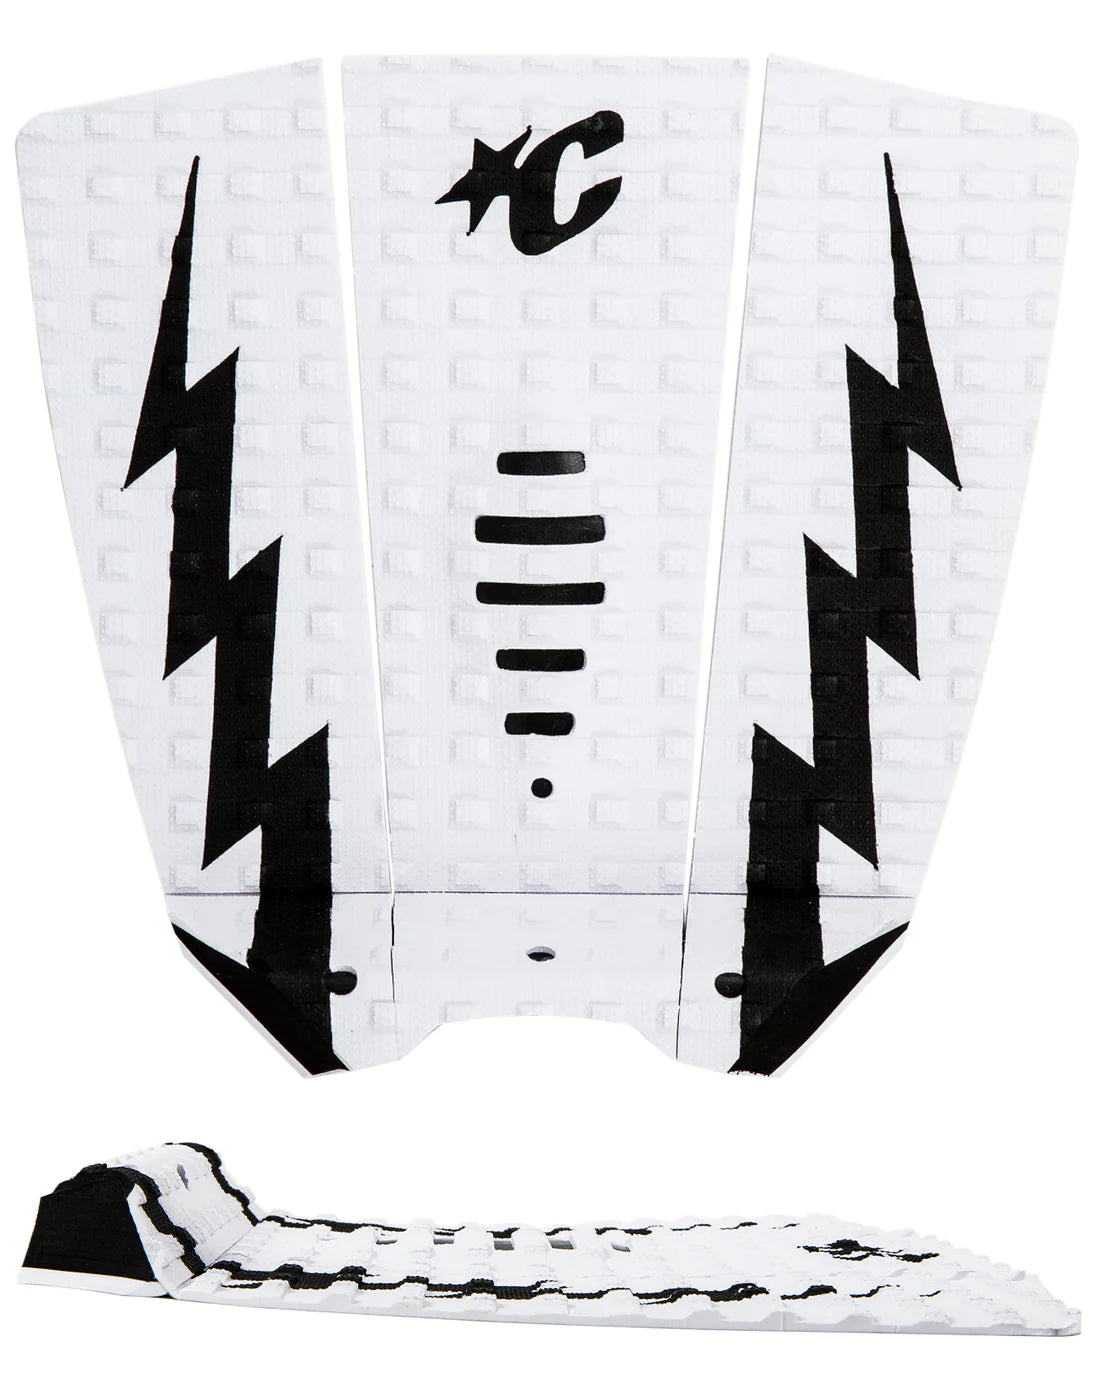 Creatures of leisure Mick Eugene Fanning Lite Traction Traction Pad White Black